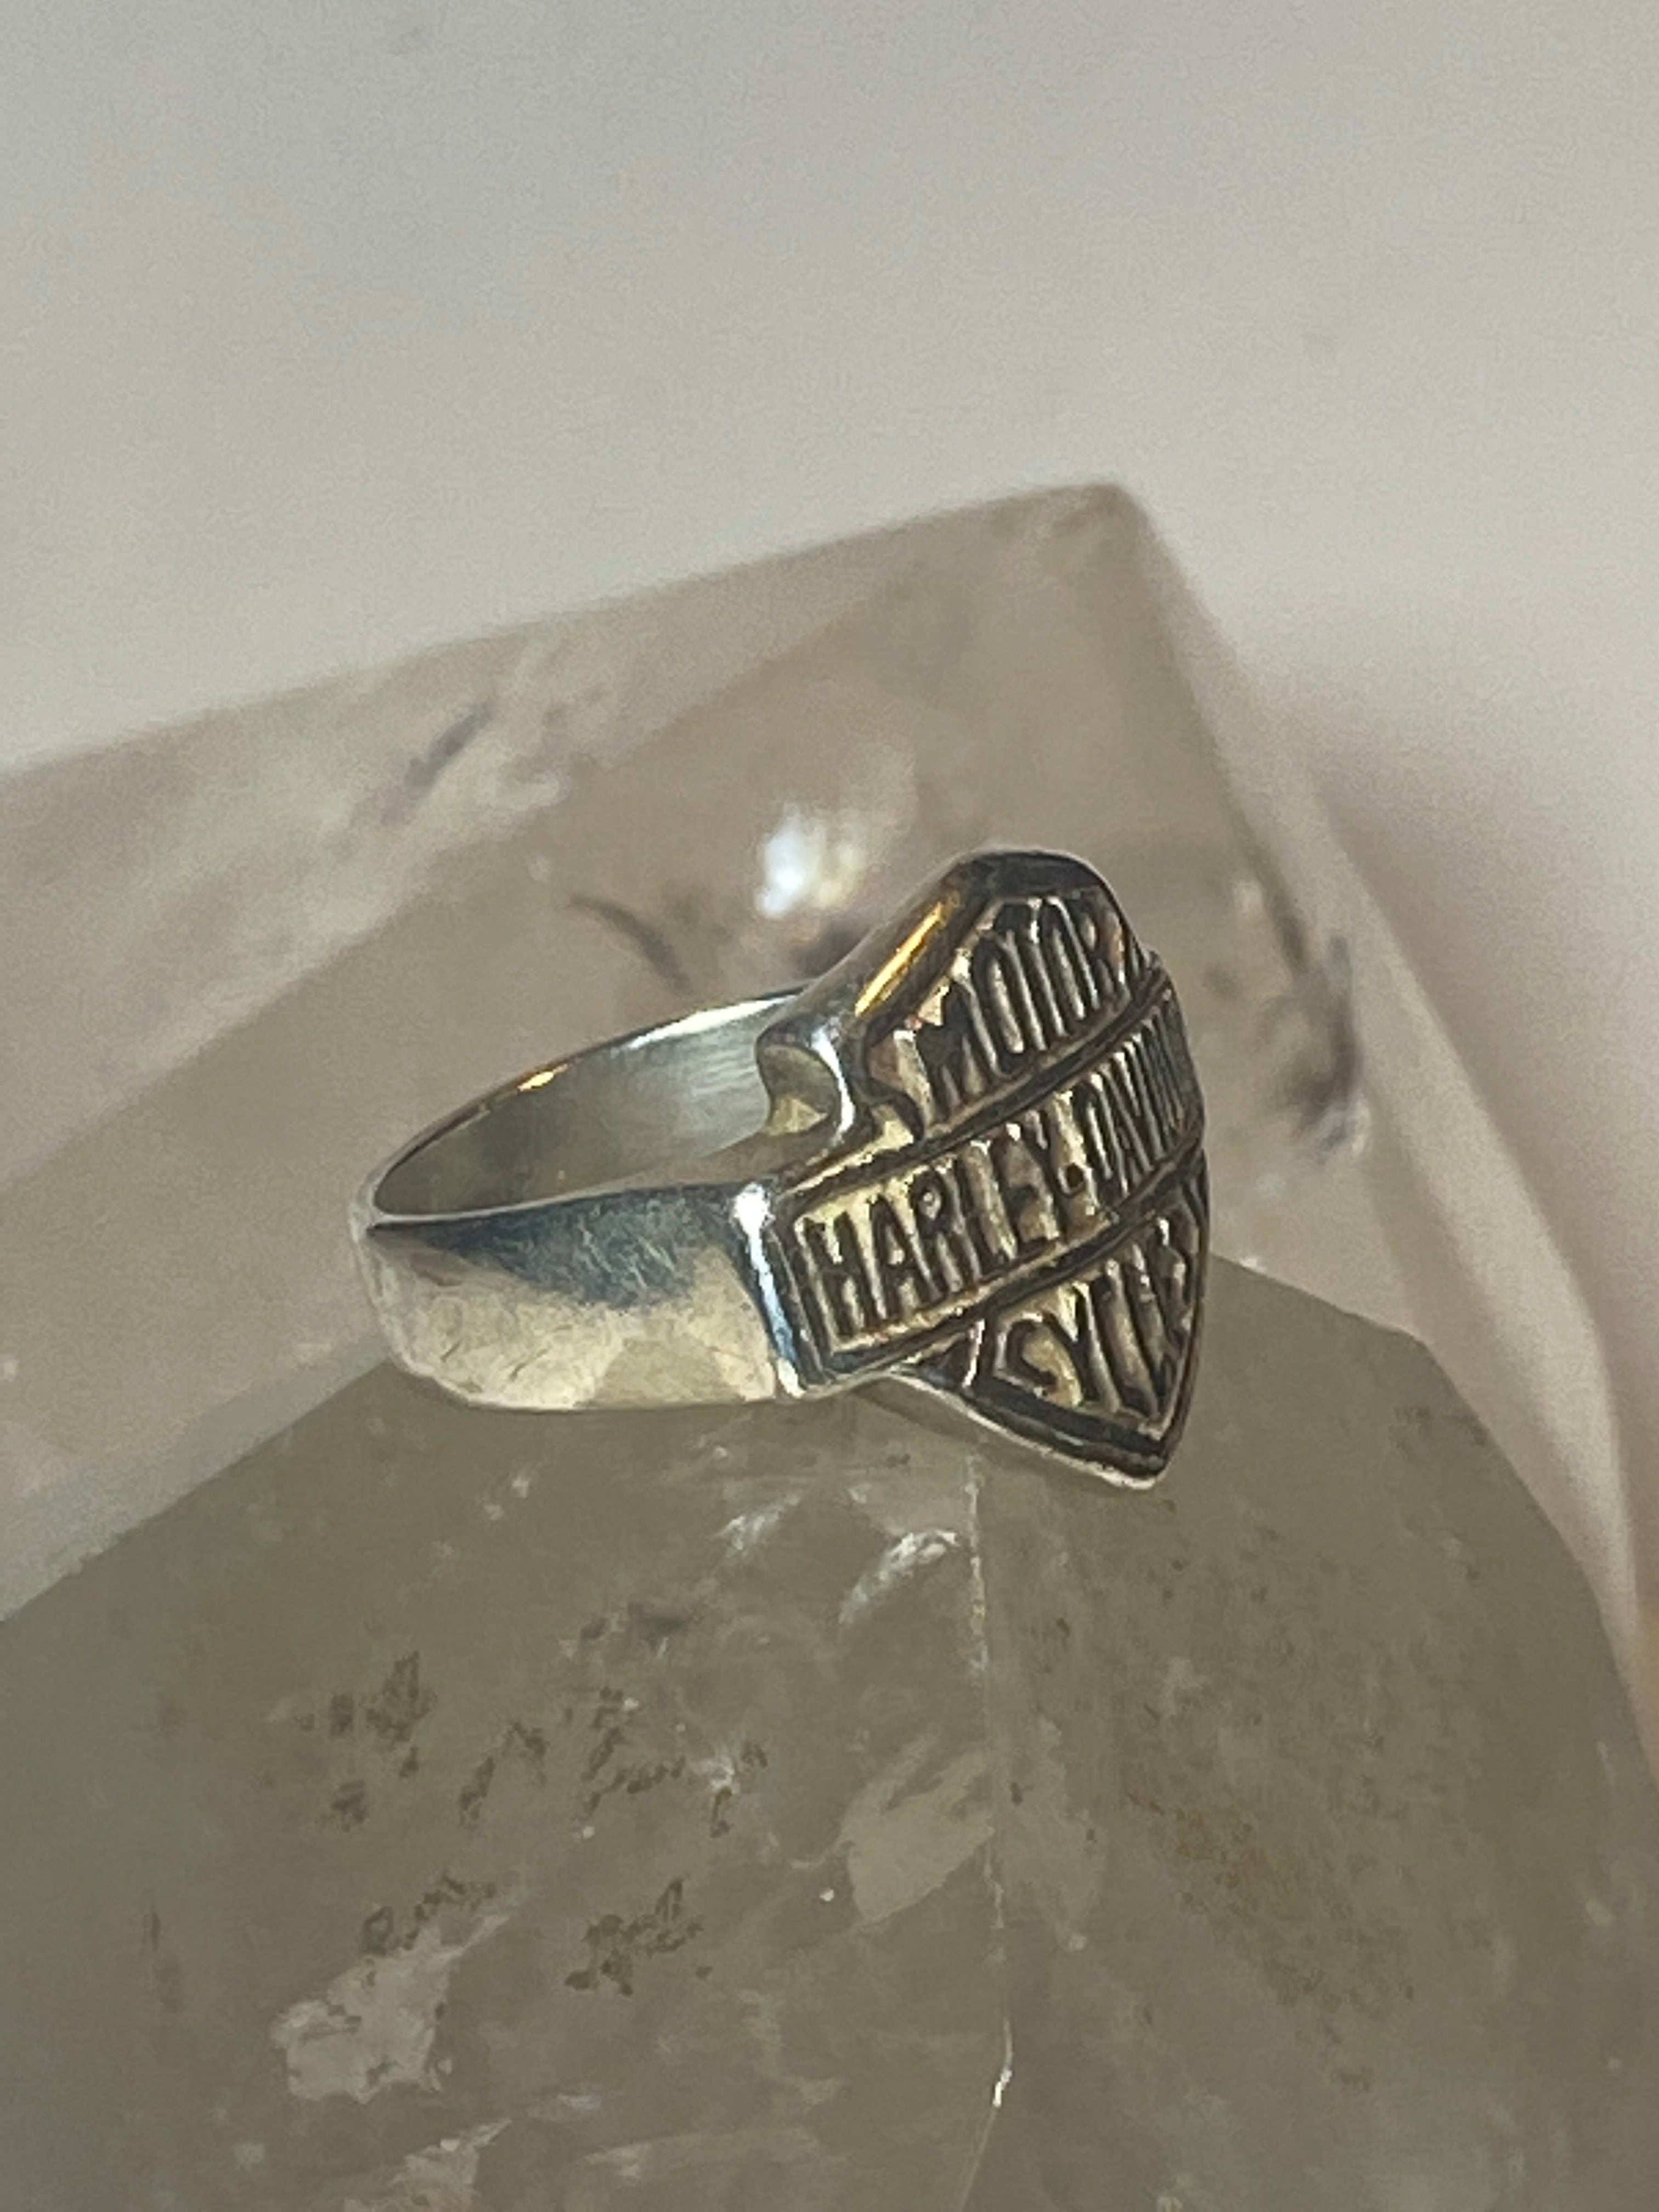 Amazing Harley Davidson Ring, Unique Ring, Harley Ring, Harley Davidson, Biker  Ring, Motorcycle Ring, Statement Ring, Biker Jewelry, Harley Jewelry |  Katre Silver Jewelry Store